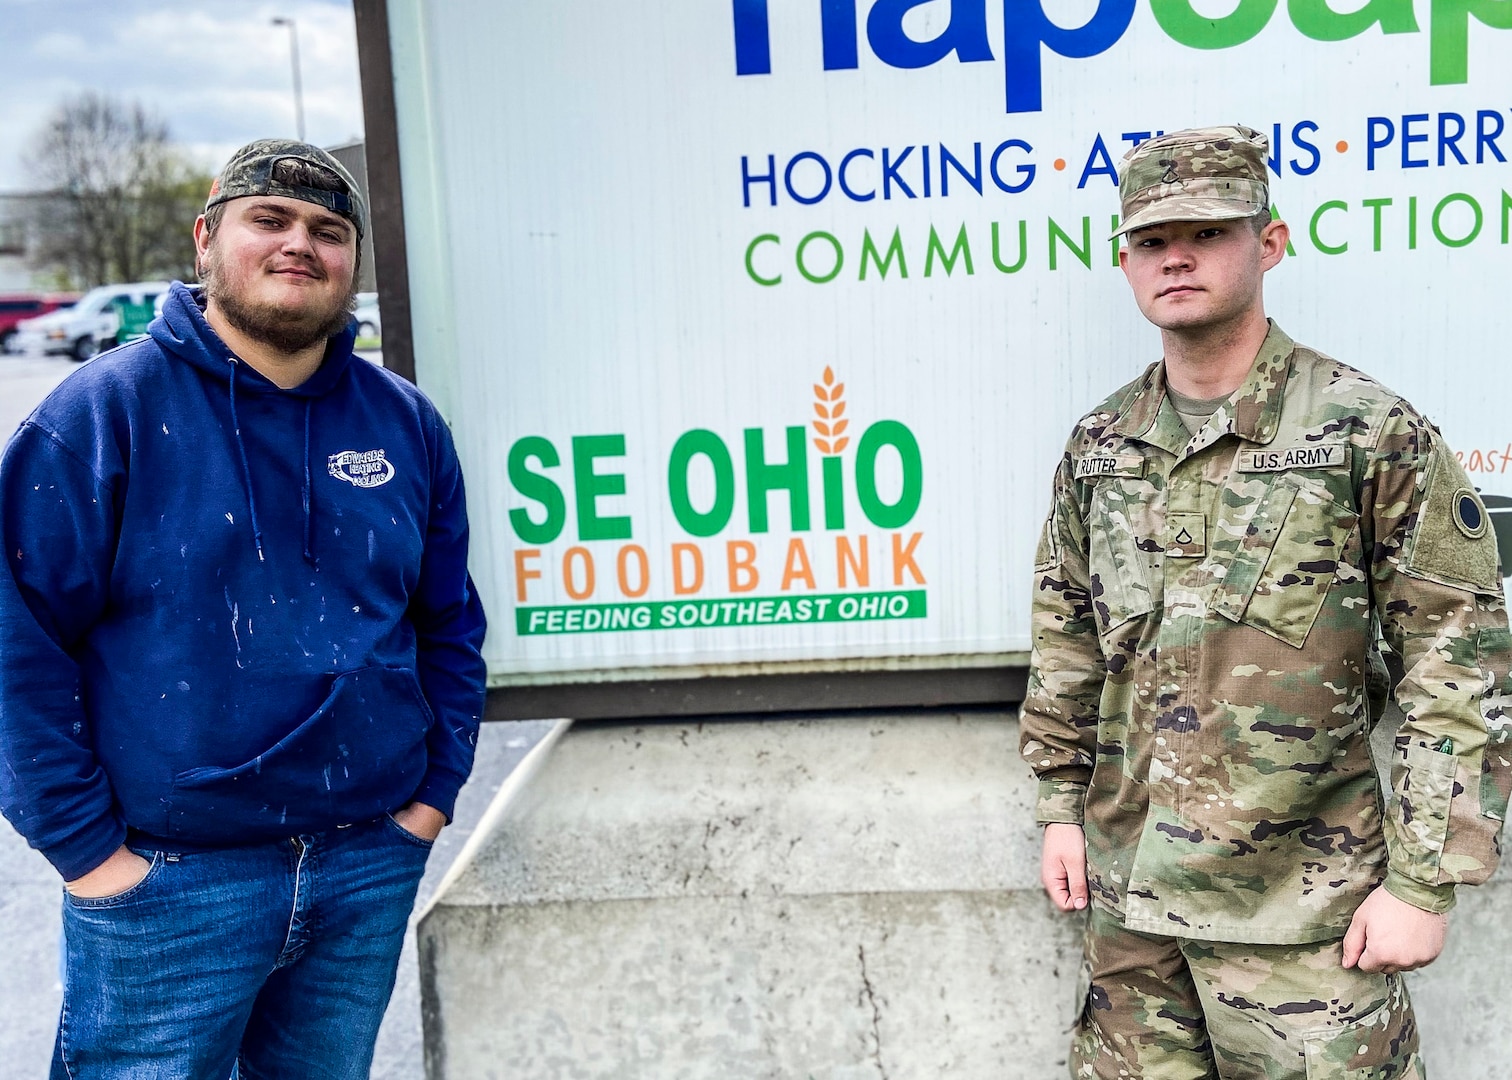 Devin Berry, left, and Ohio National Guard Pfc. Jayden Rutter, both lifelong Southeast Ohio residents, outside the Southeast Ohio Foodbank in Logan April 10, 2020. Berry, a laborer at the food bank for five years, has been working with Rutter and other Soldiers of the 237th Support Battalion to package and distribute food during the COVID-19 pandemic.